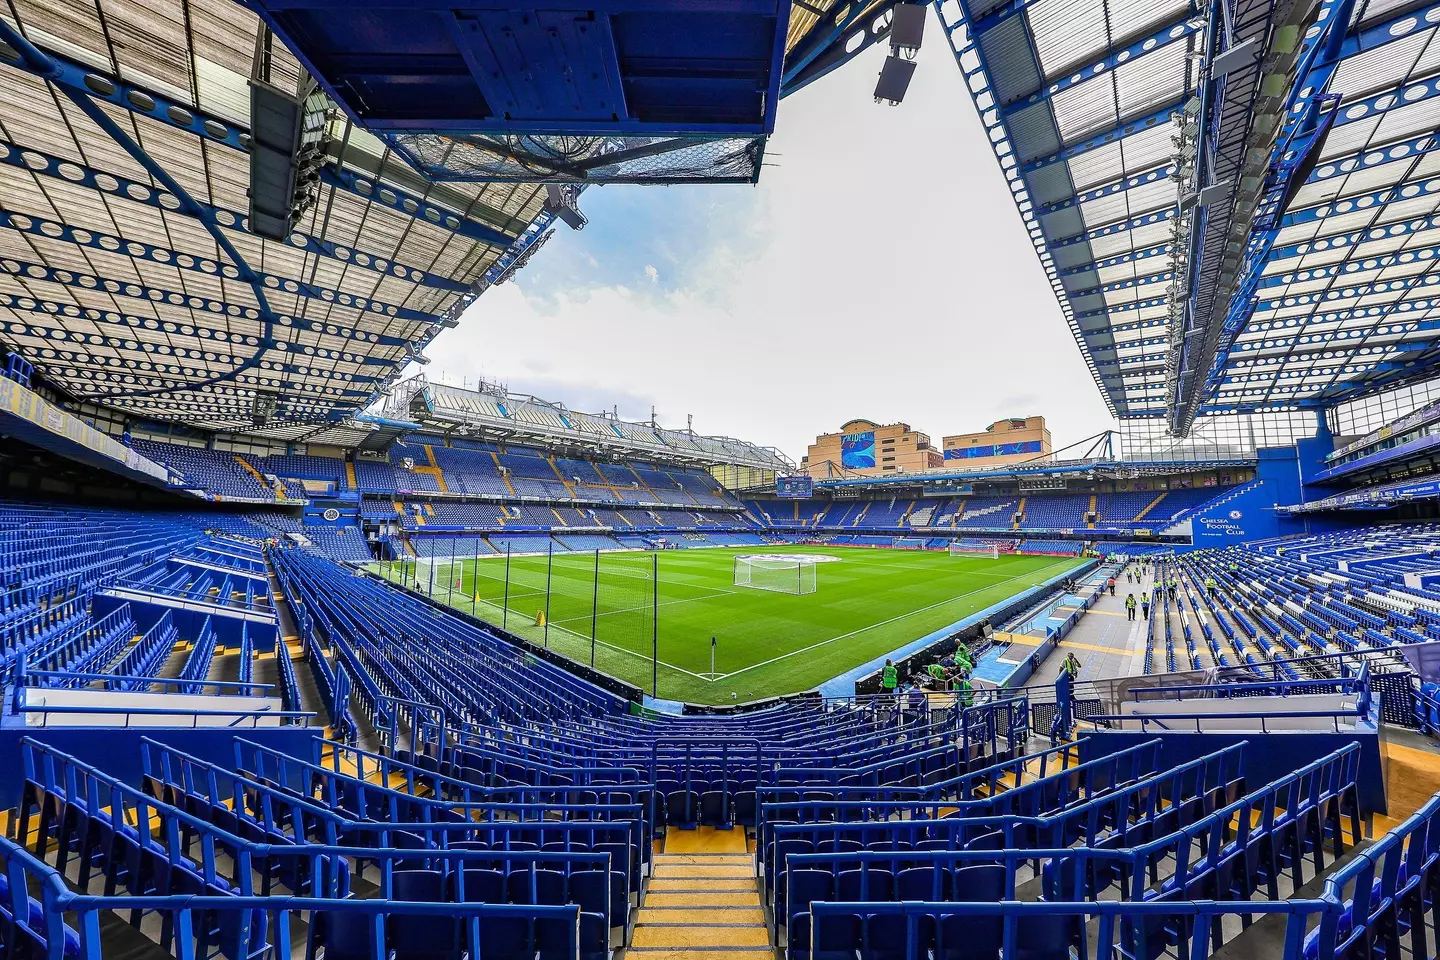 General view stadium illustration during the Premier League match. (Alamy)